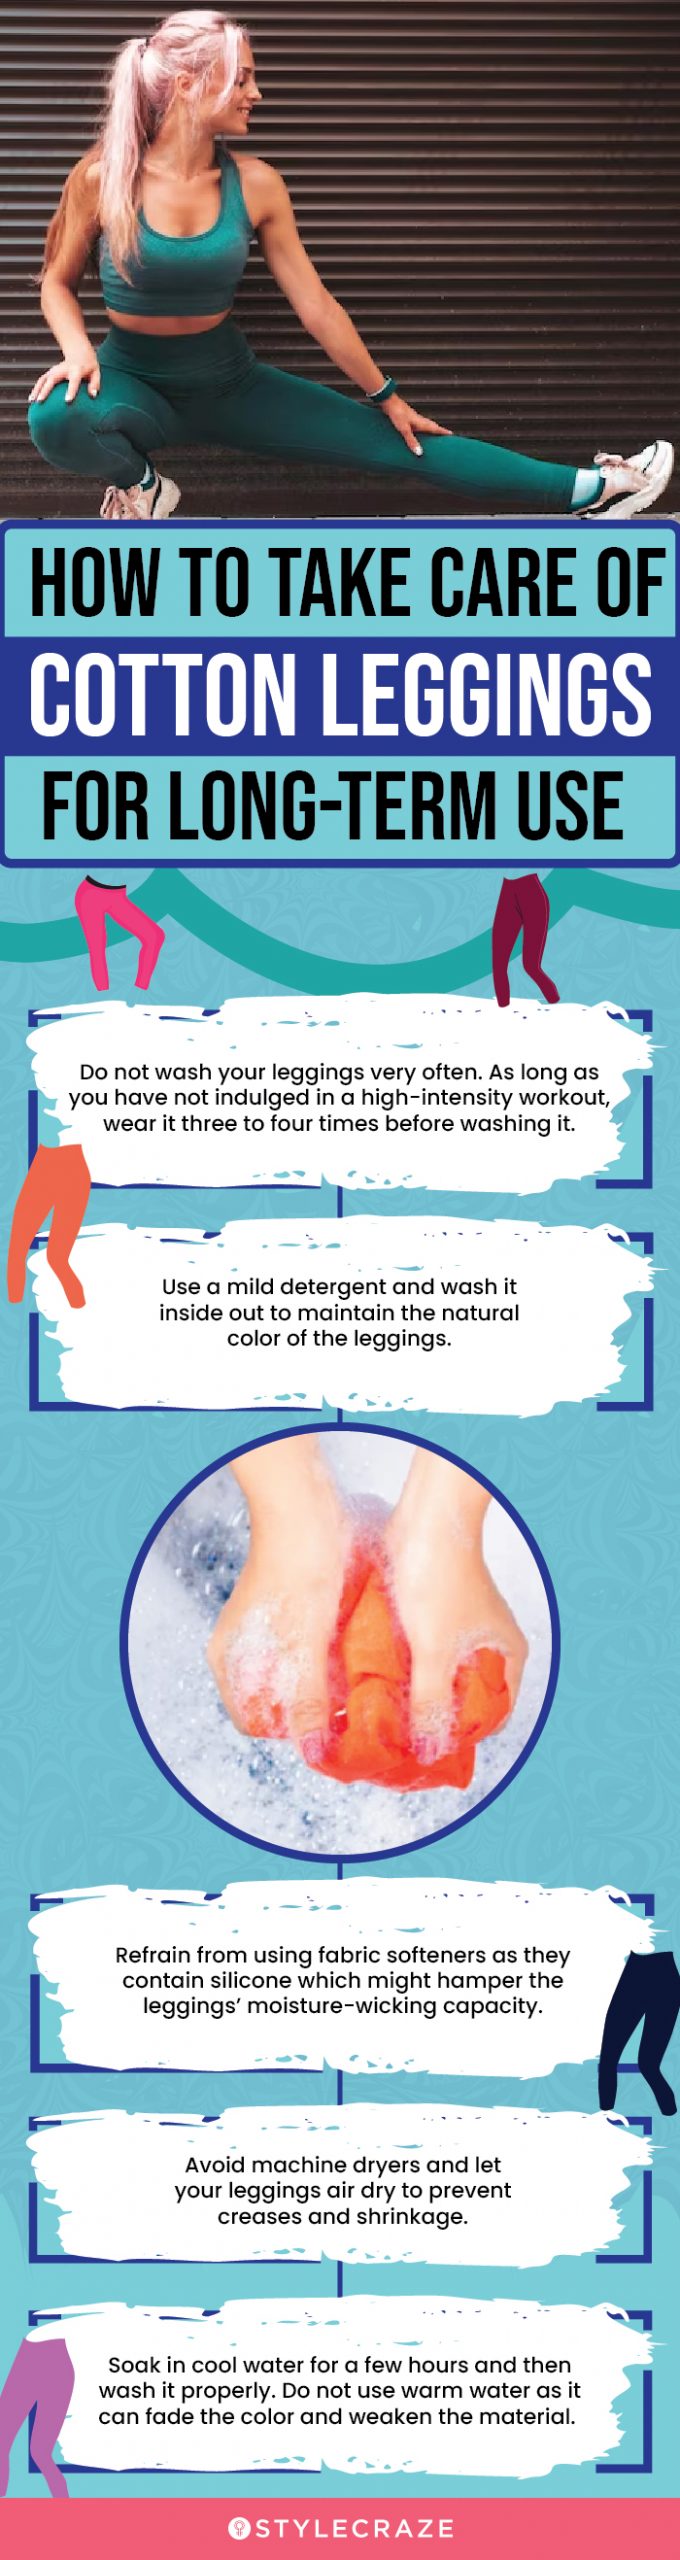 How To Take Care Of Cotton Leggings For Long-Term Use(infographic)